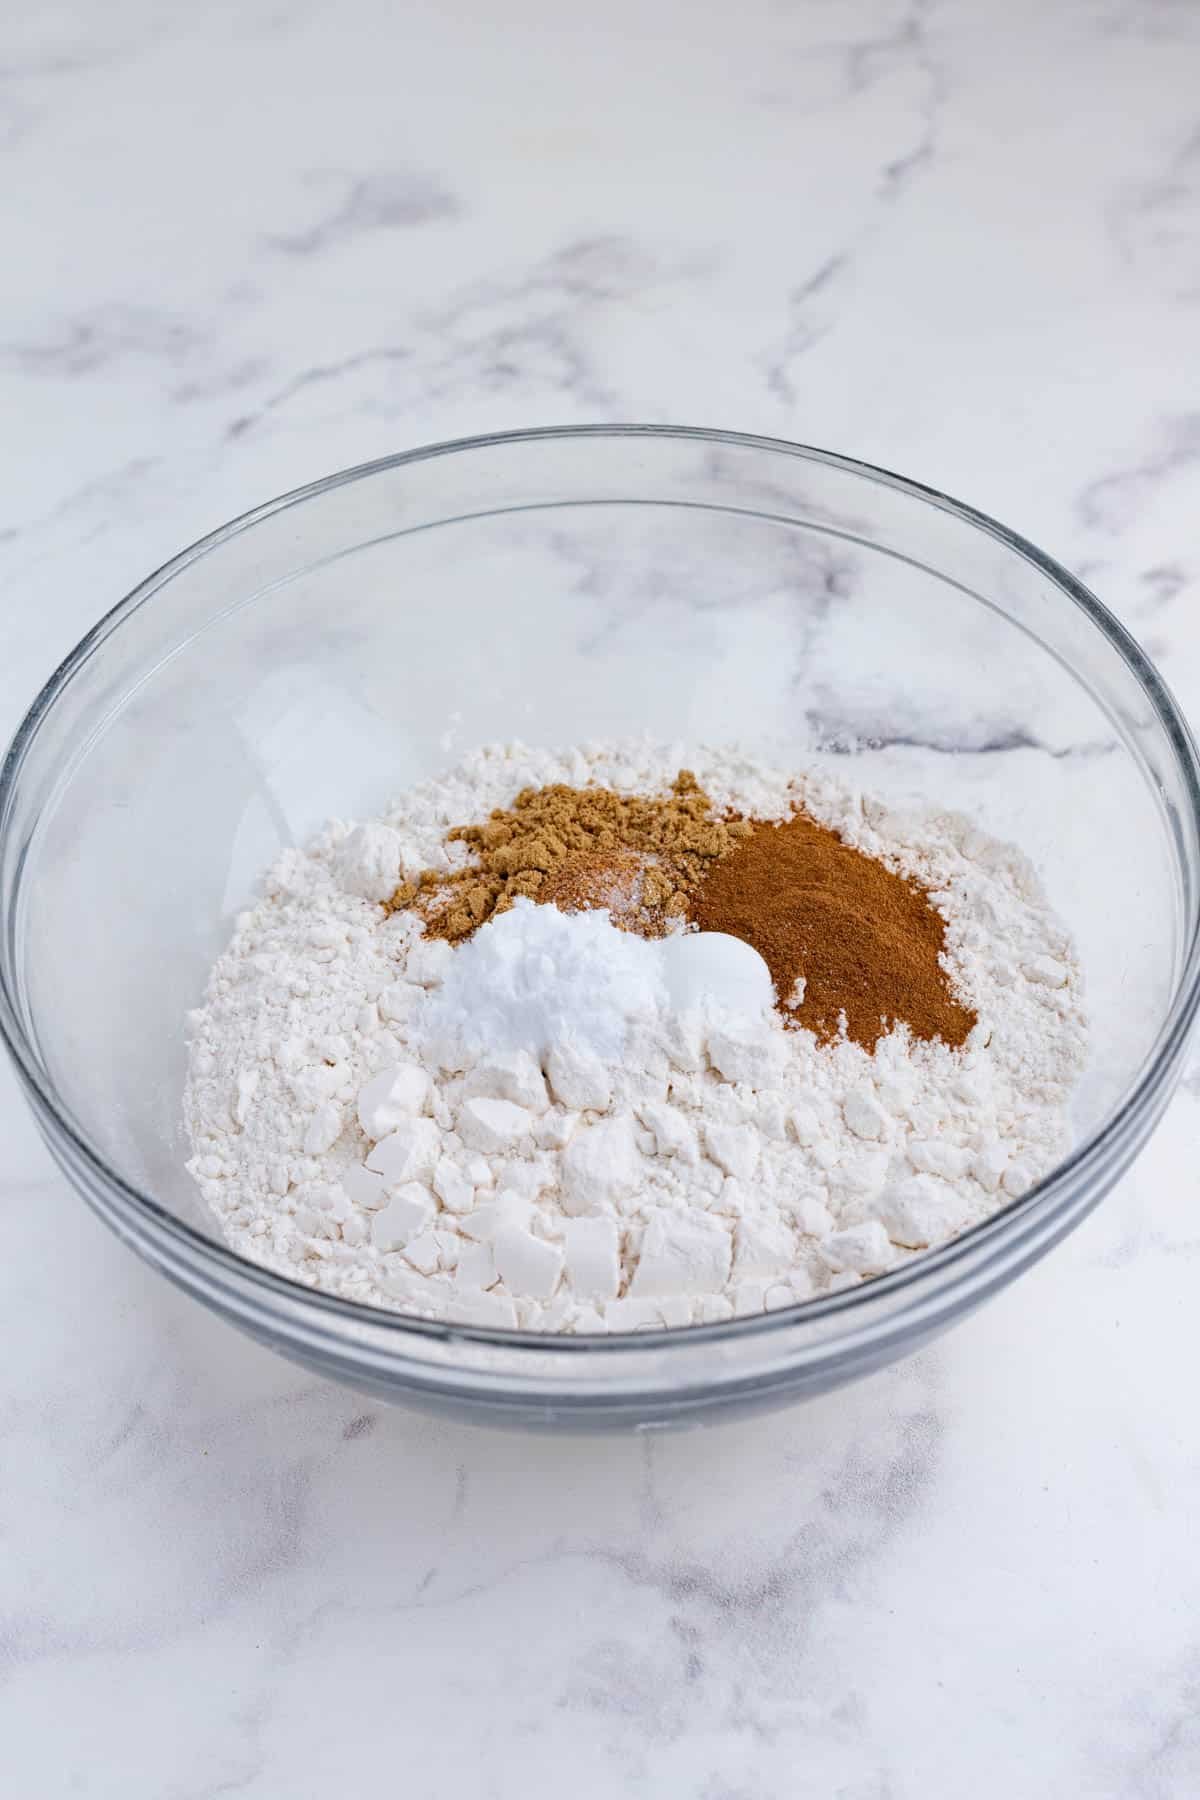 Dry ingredients are added to a bowl.